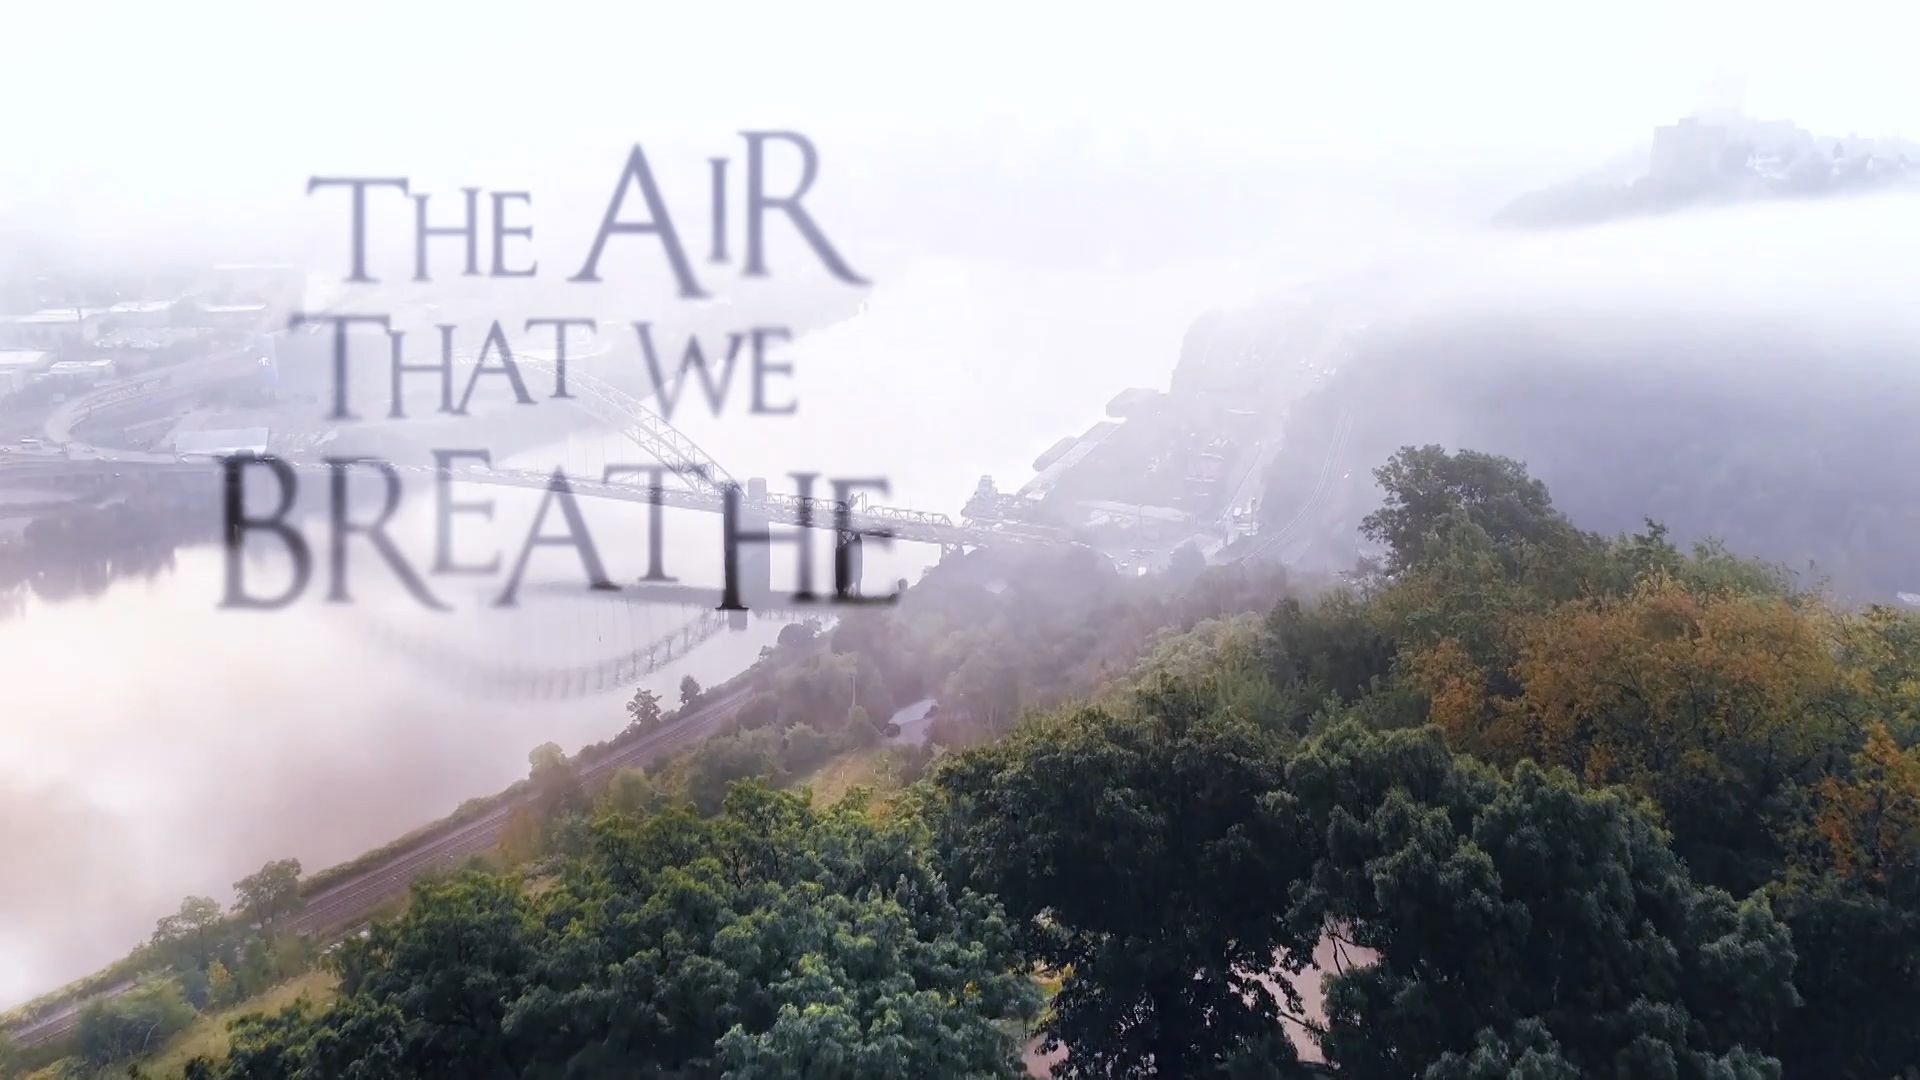 The Air that We Breathe